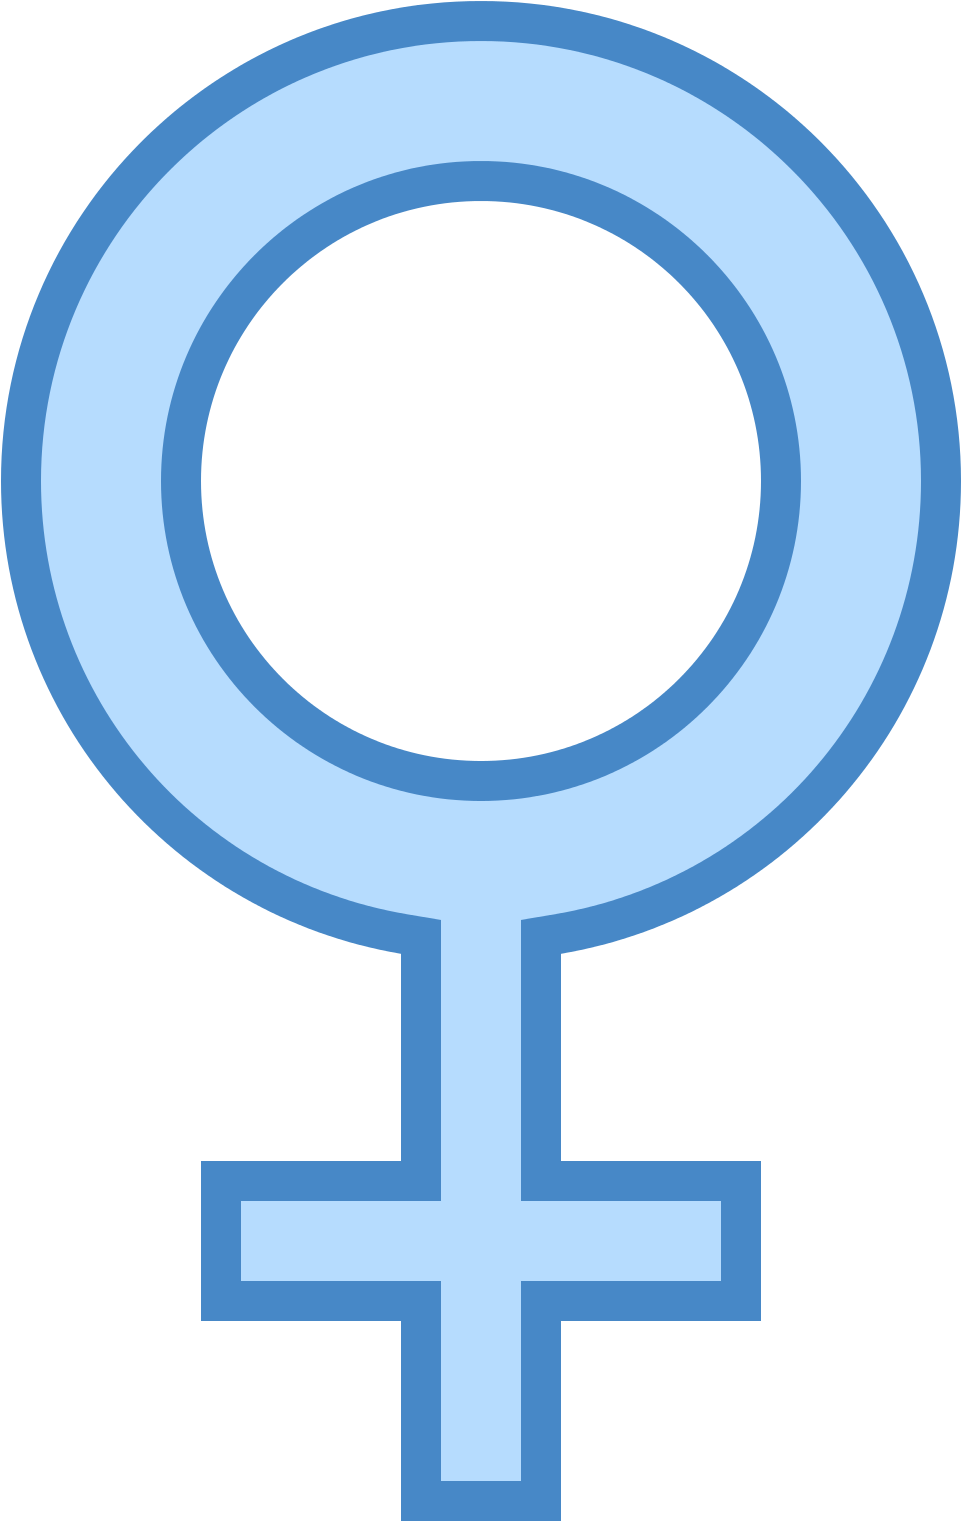 Male Managers Command Less Authority In Female Stereotyped - Circle With Cross On Bottom Symbol (1600x1600), Png Download